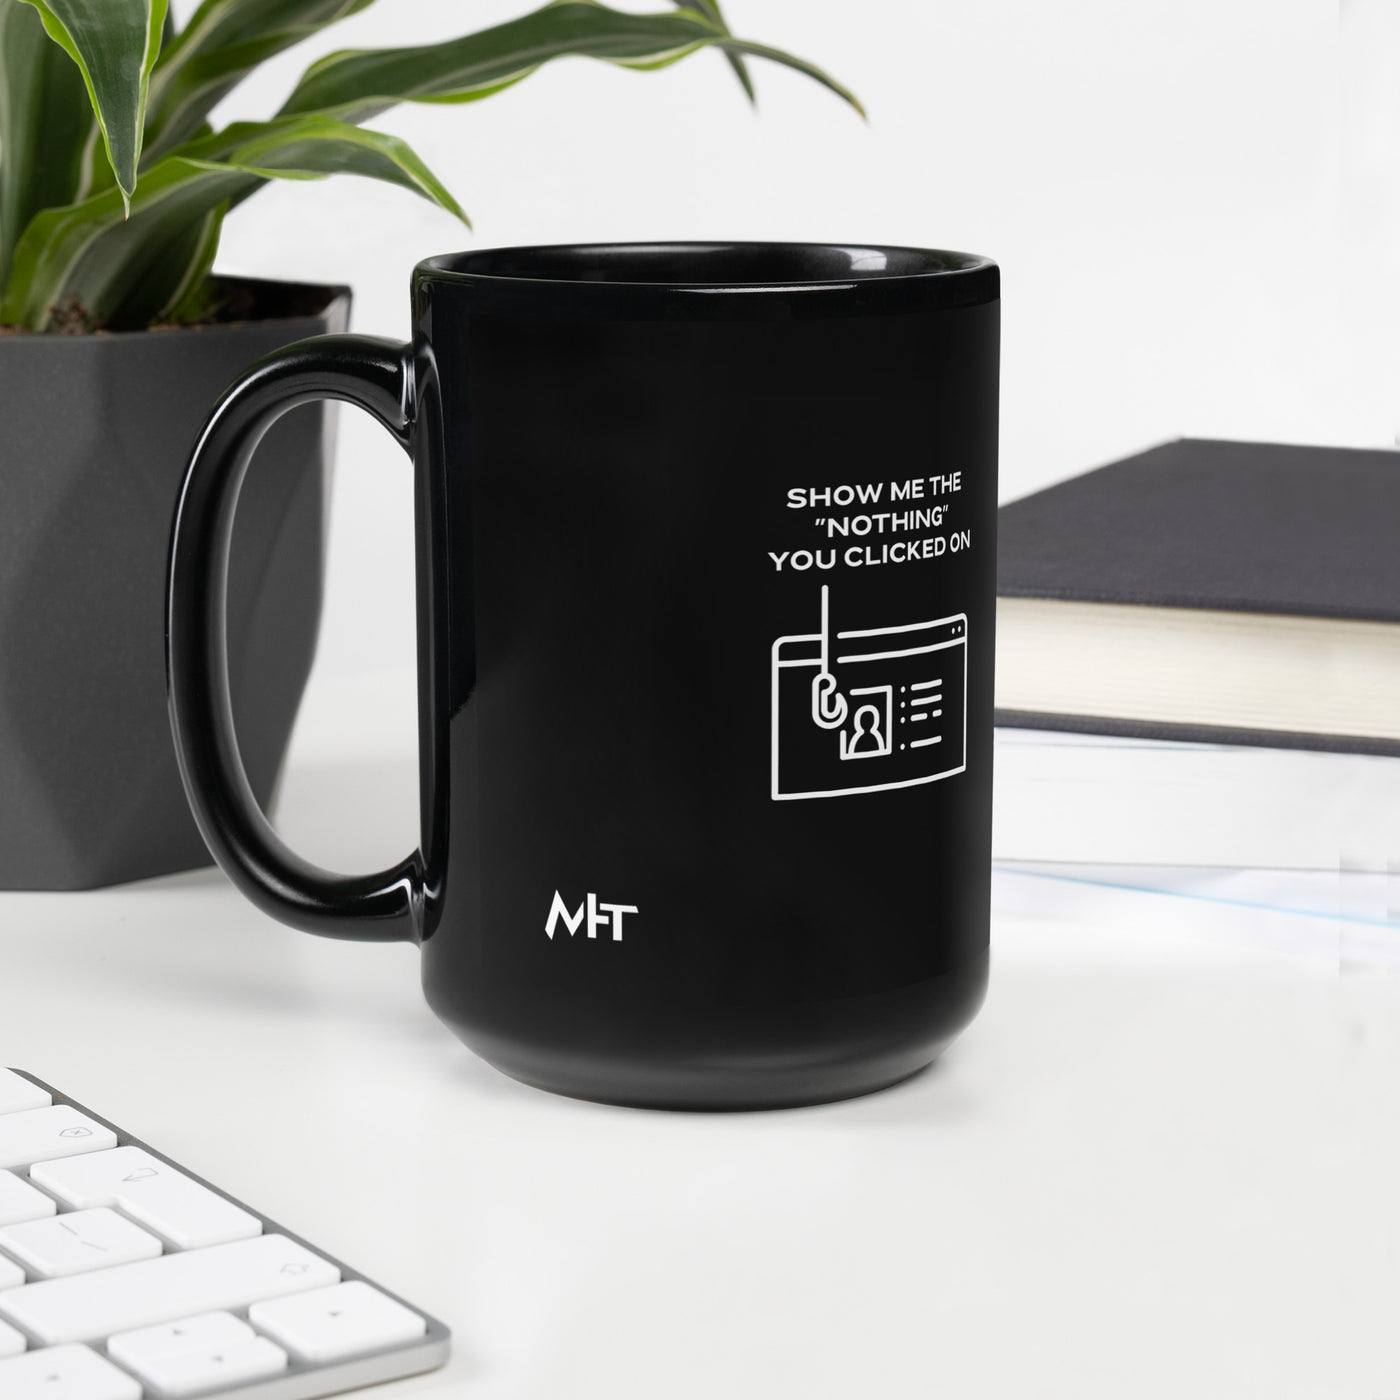 Show me the Nothing you Clicked on - Black Glossy Mug